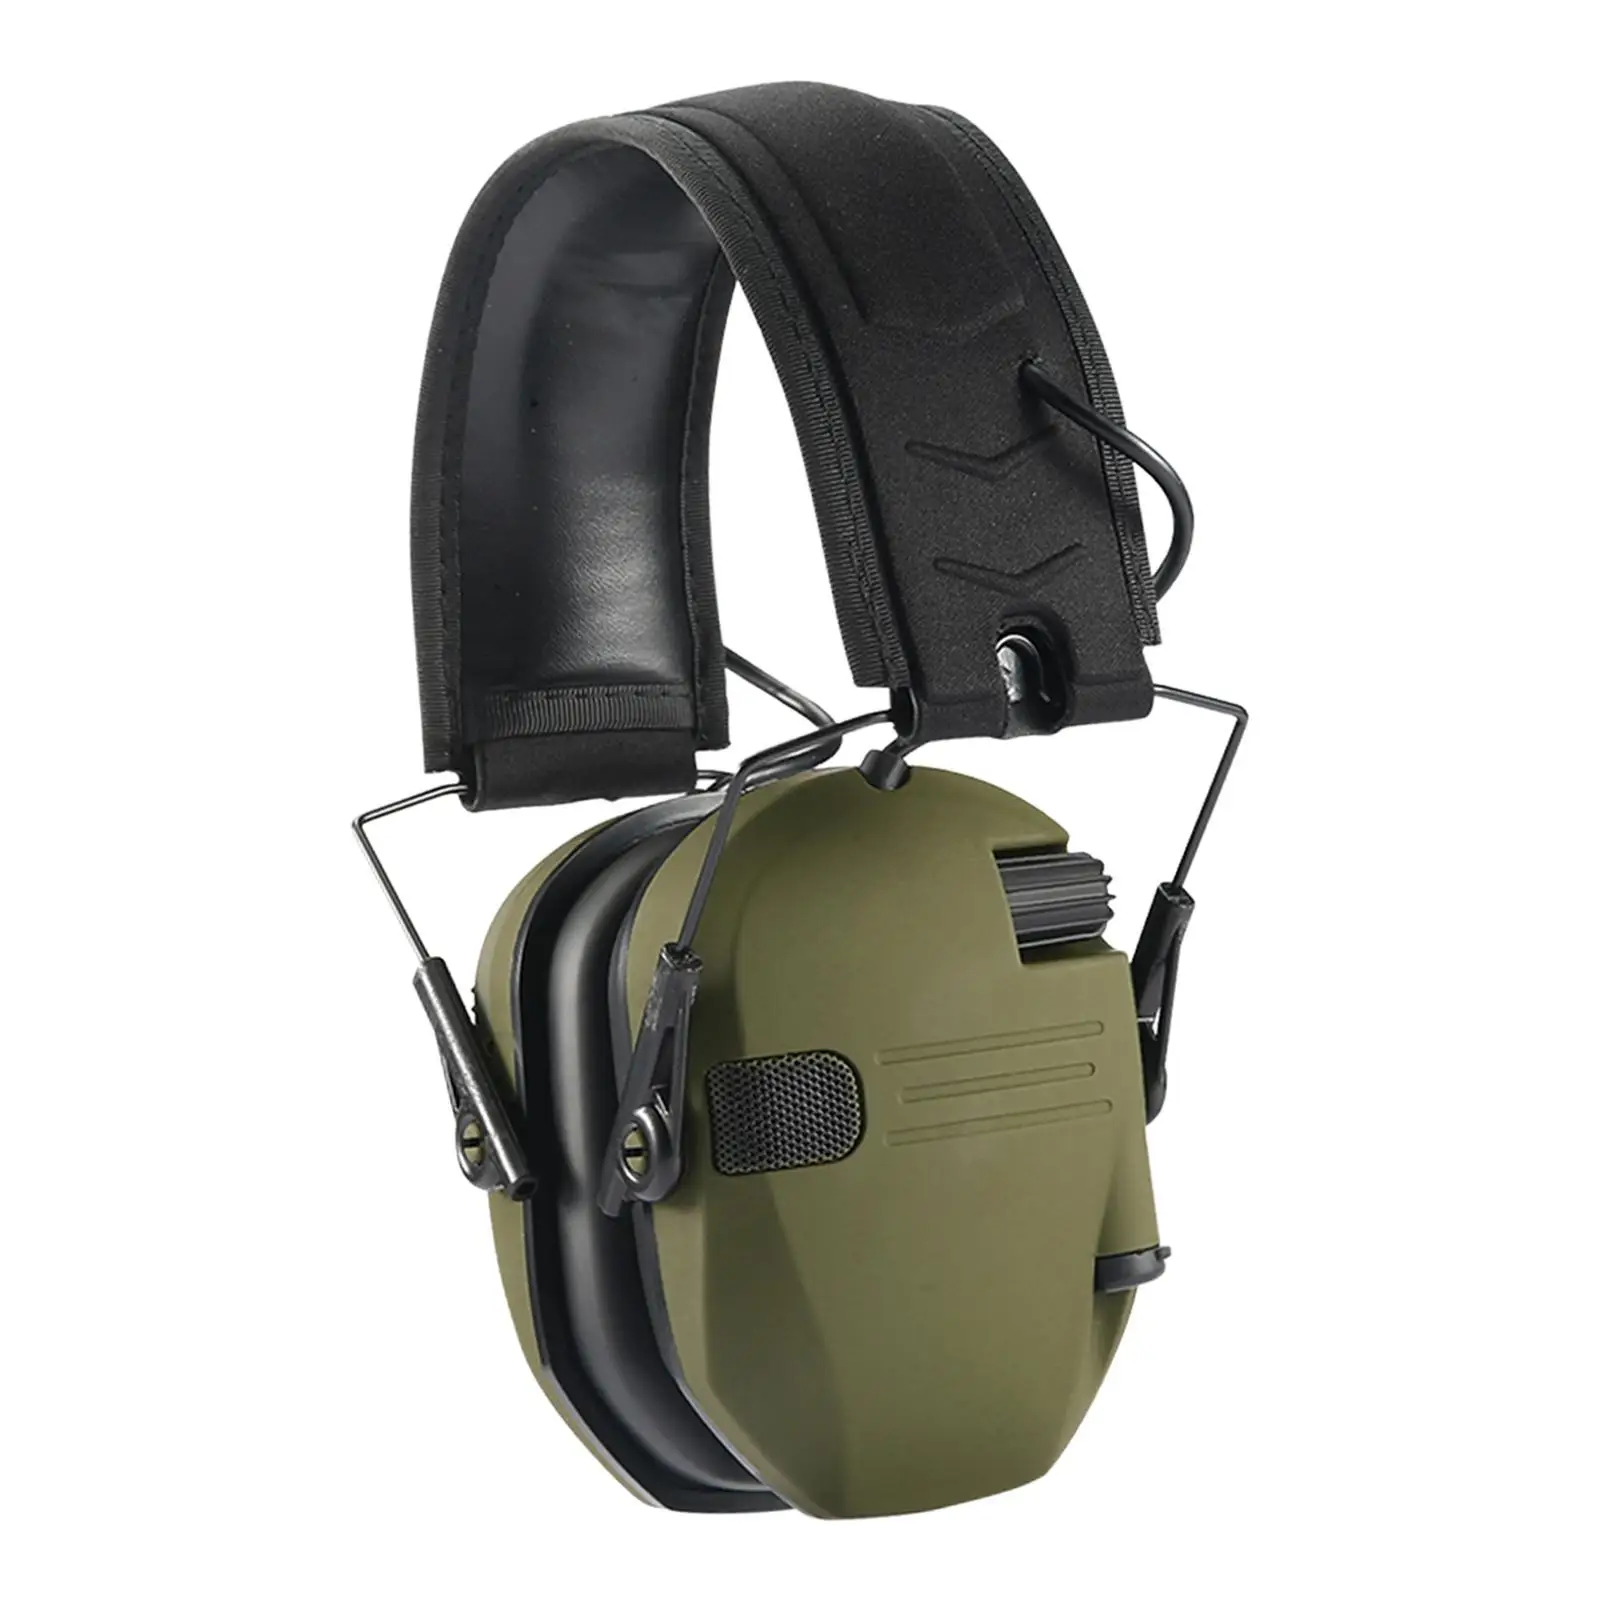 Electronic Earmuffs Safety Ear Muffs for Construction Mowing Gaming